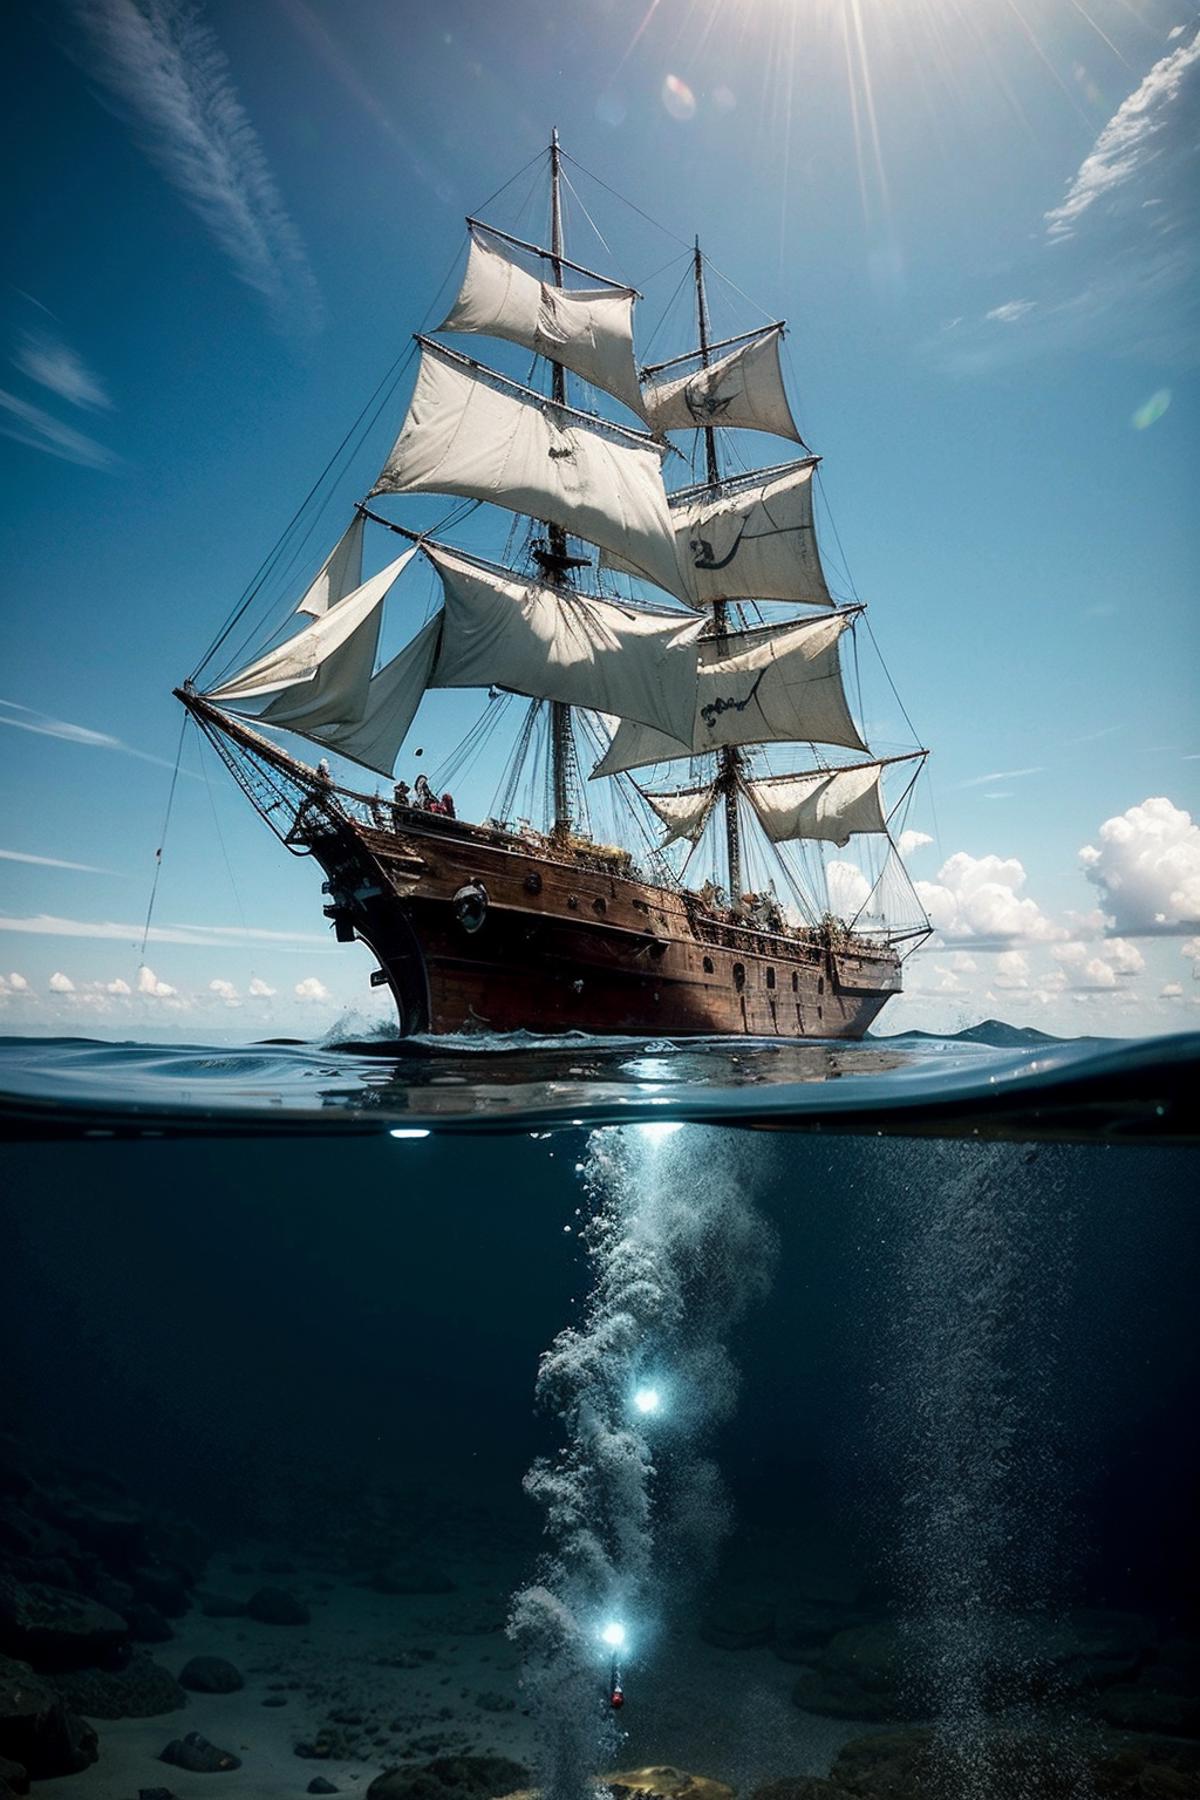 A large sailing ship floating on the ocean with its sails down.